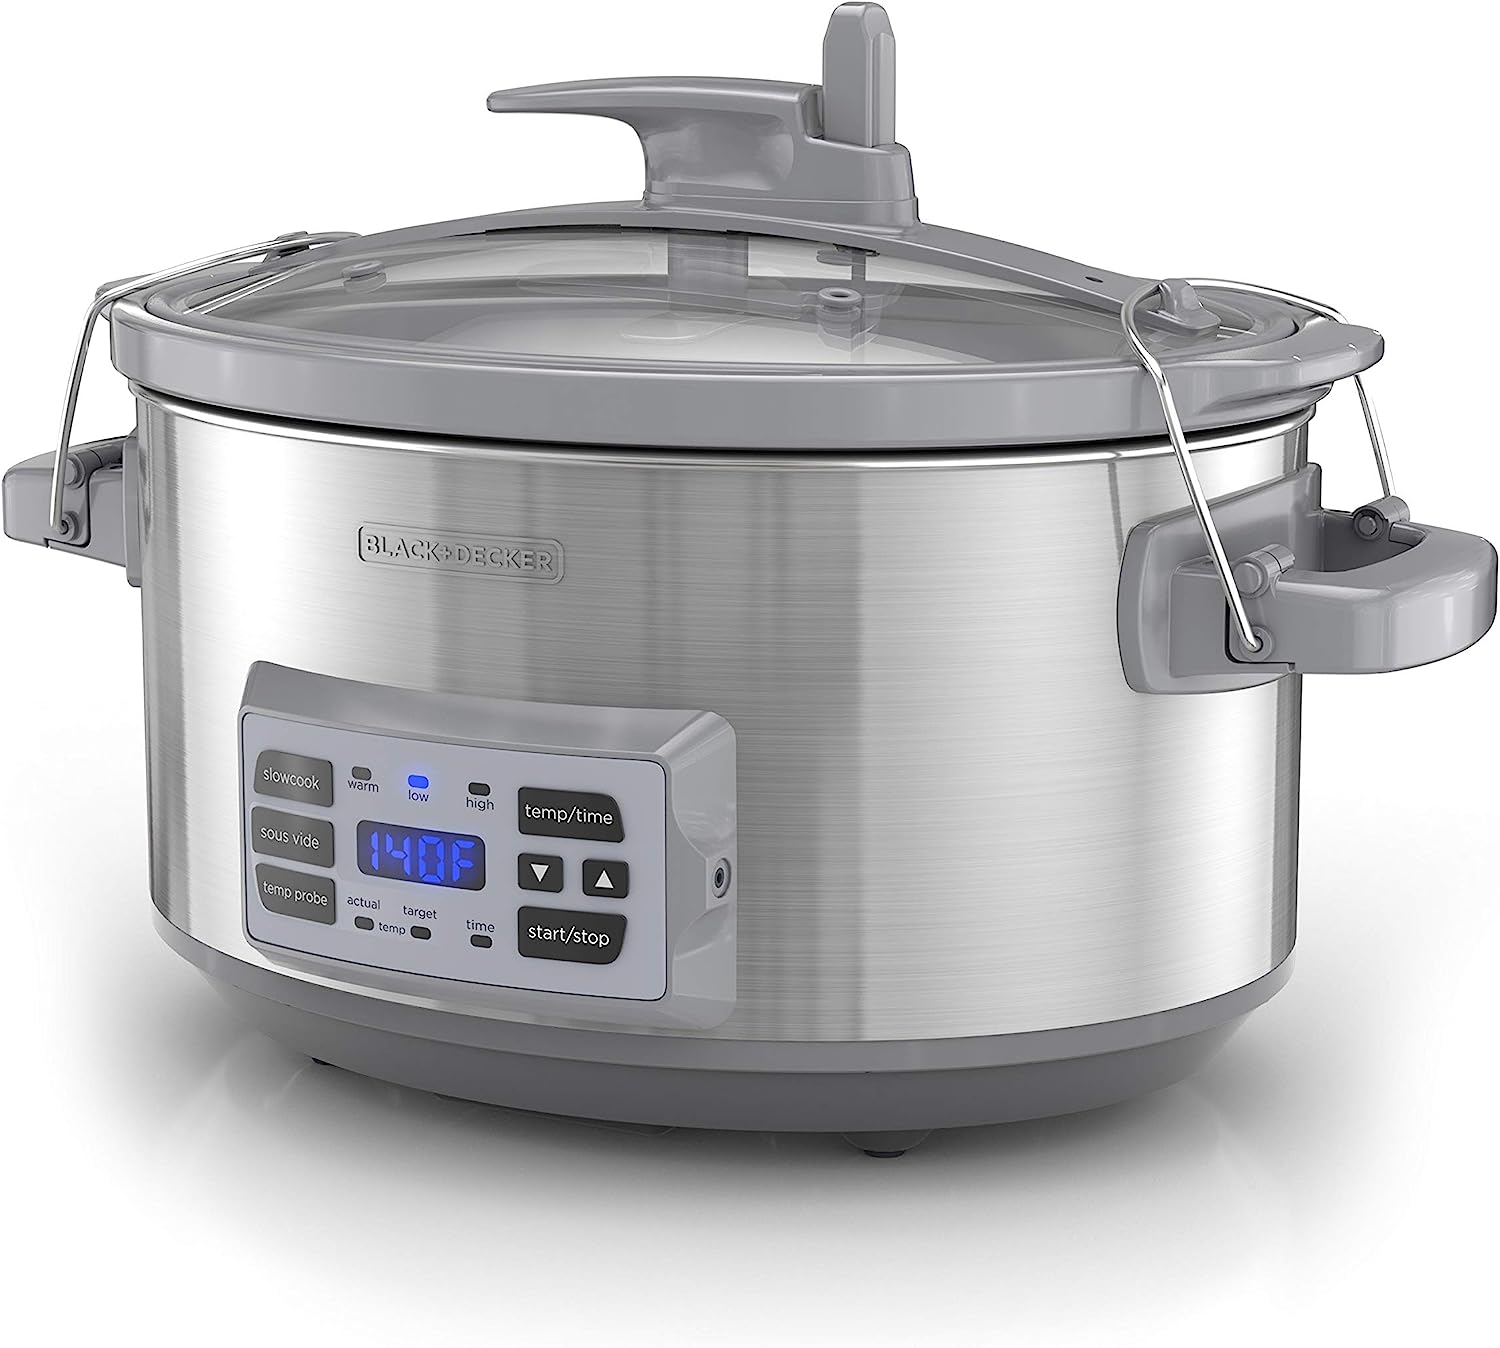 https://bigbigmart.com/wp-content/uploads/2023/07/BLACKDECKER-SCD7007SSD-Digital-Slow-Cooker-with-Temperature-Probe-Precision-Sous-Vide-7-Quart-Capacity-Stainless-Steel.jpg